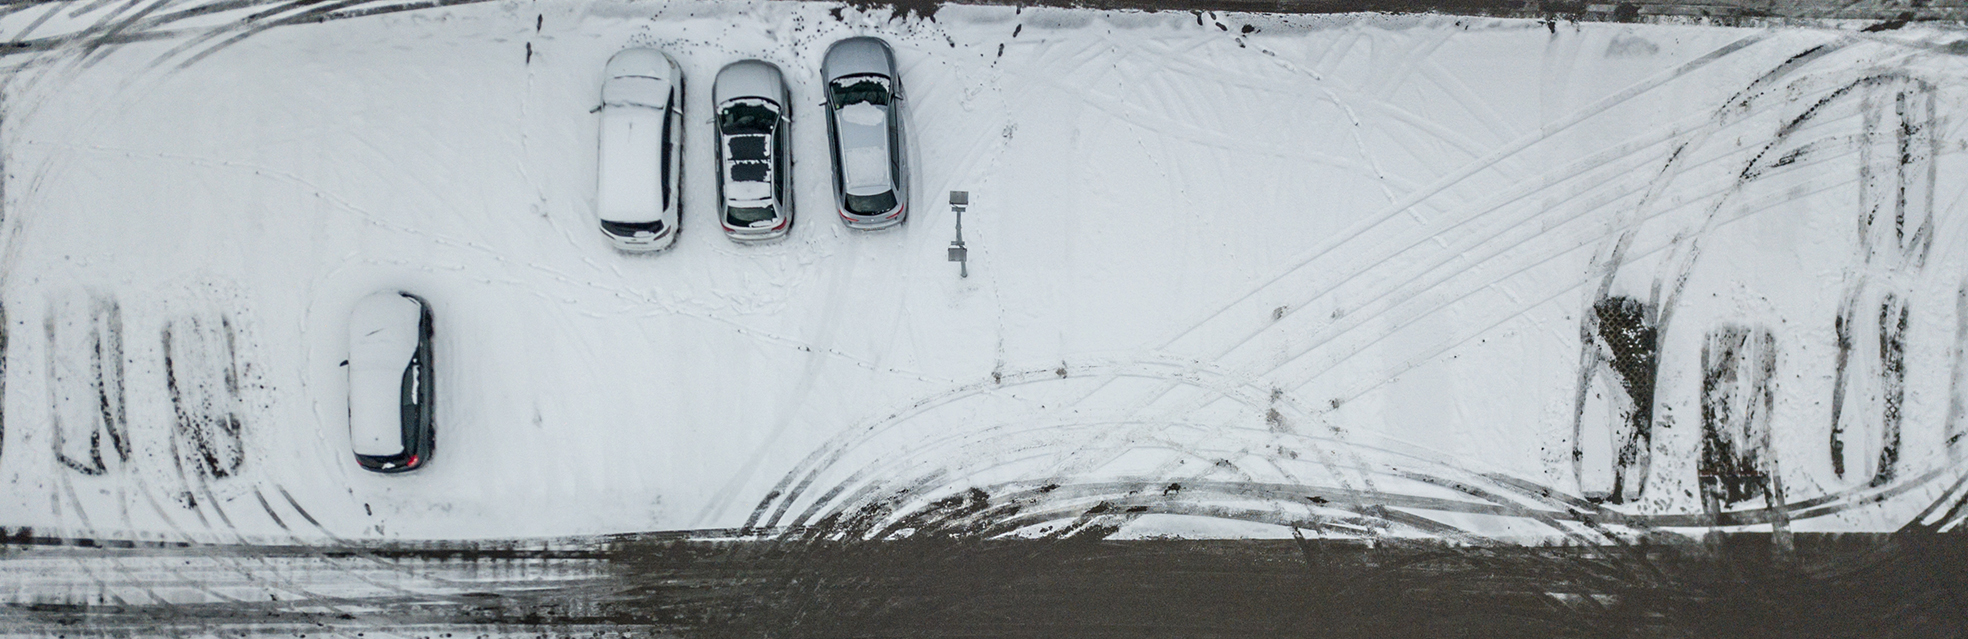 parking lot with snow and cars